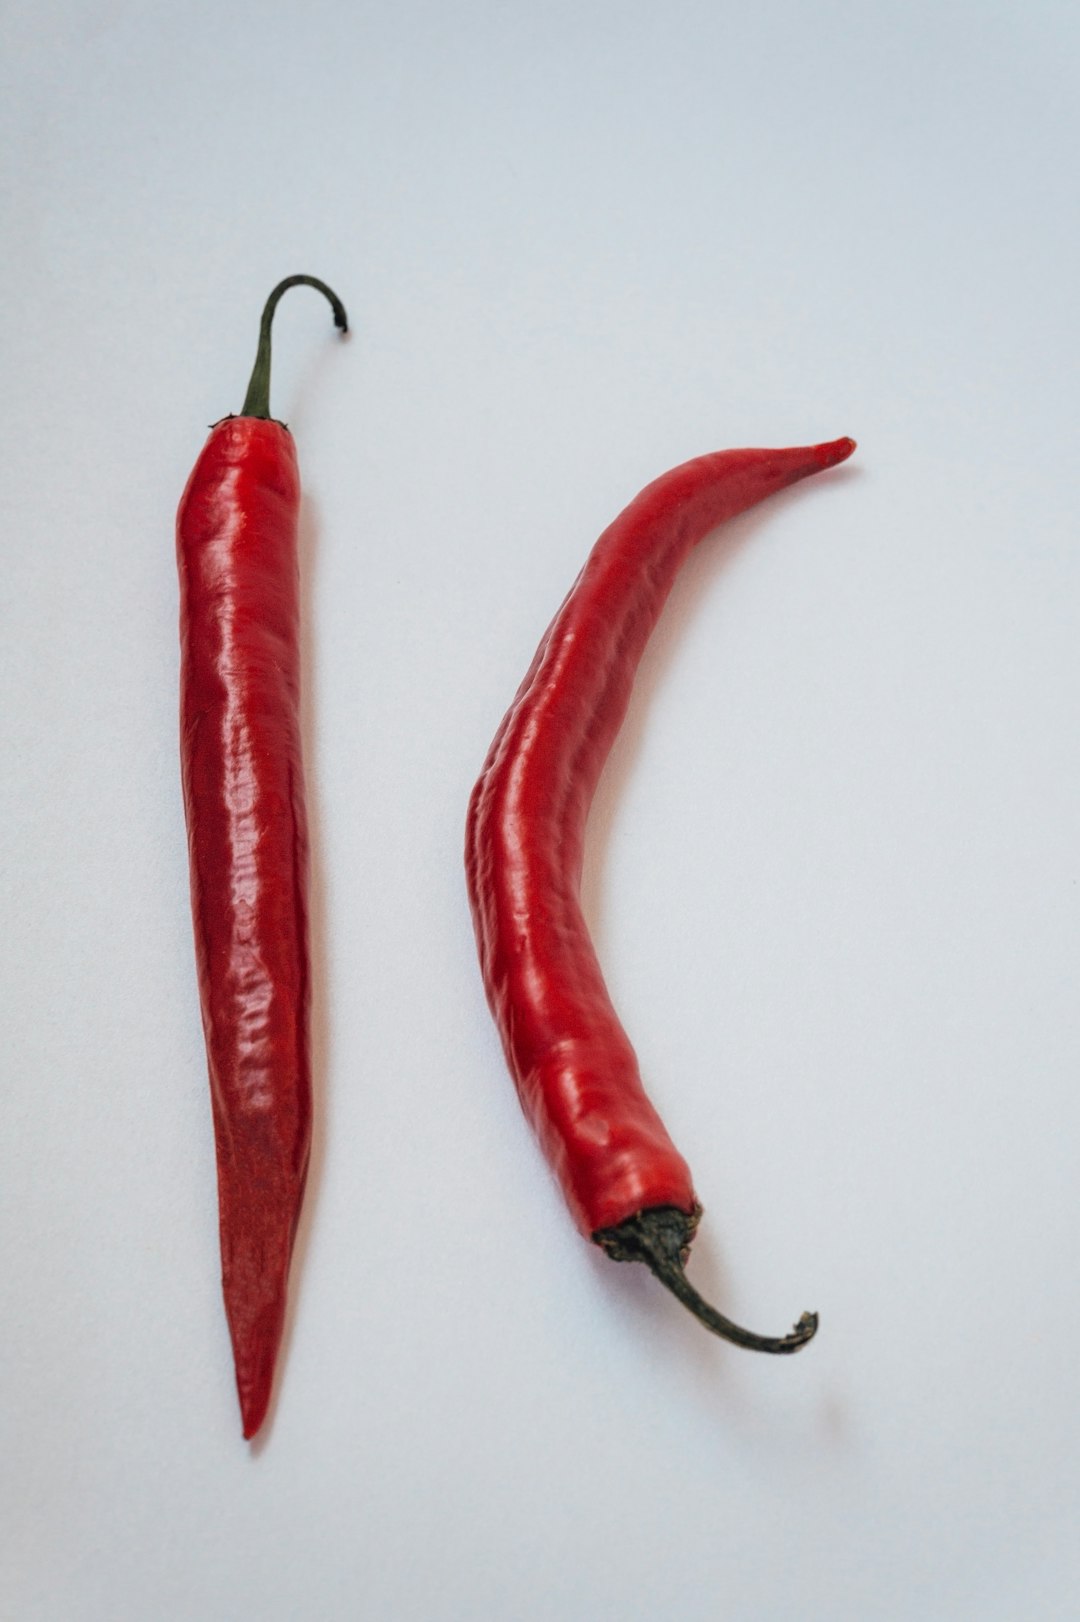 3 red chili on white surface